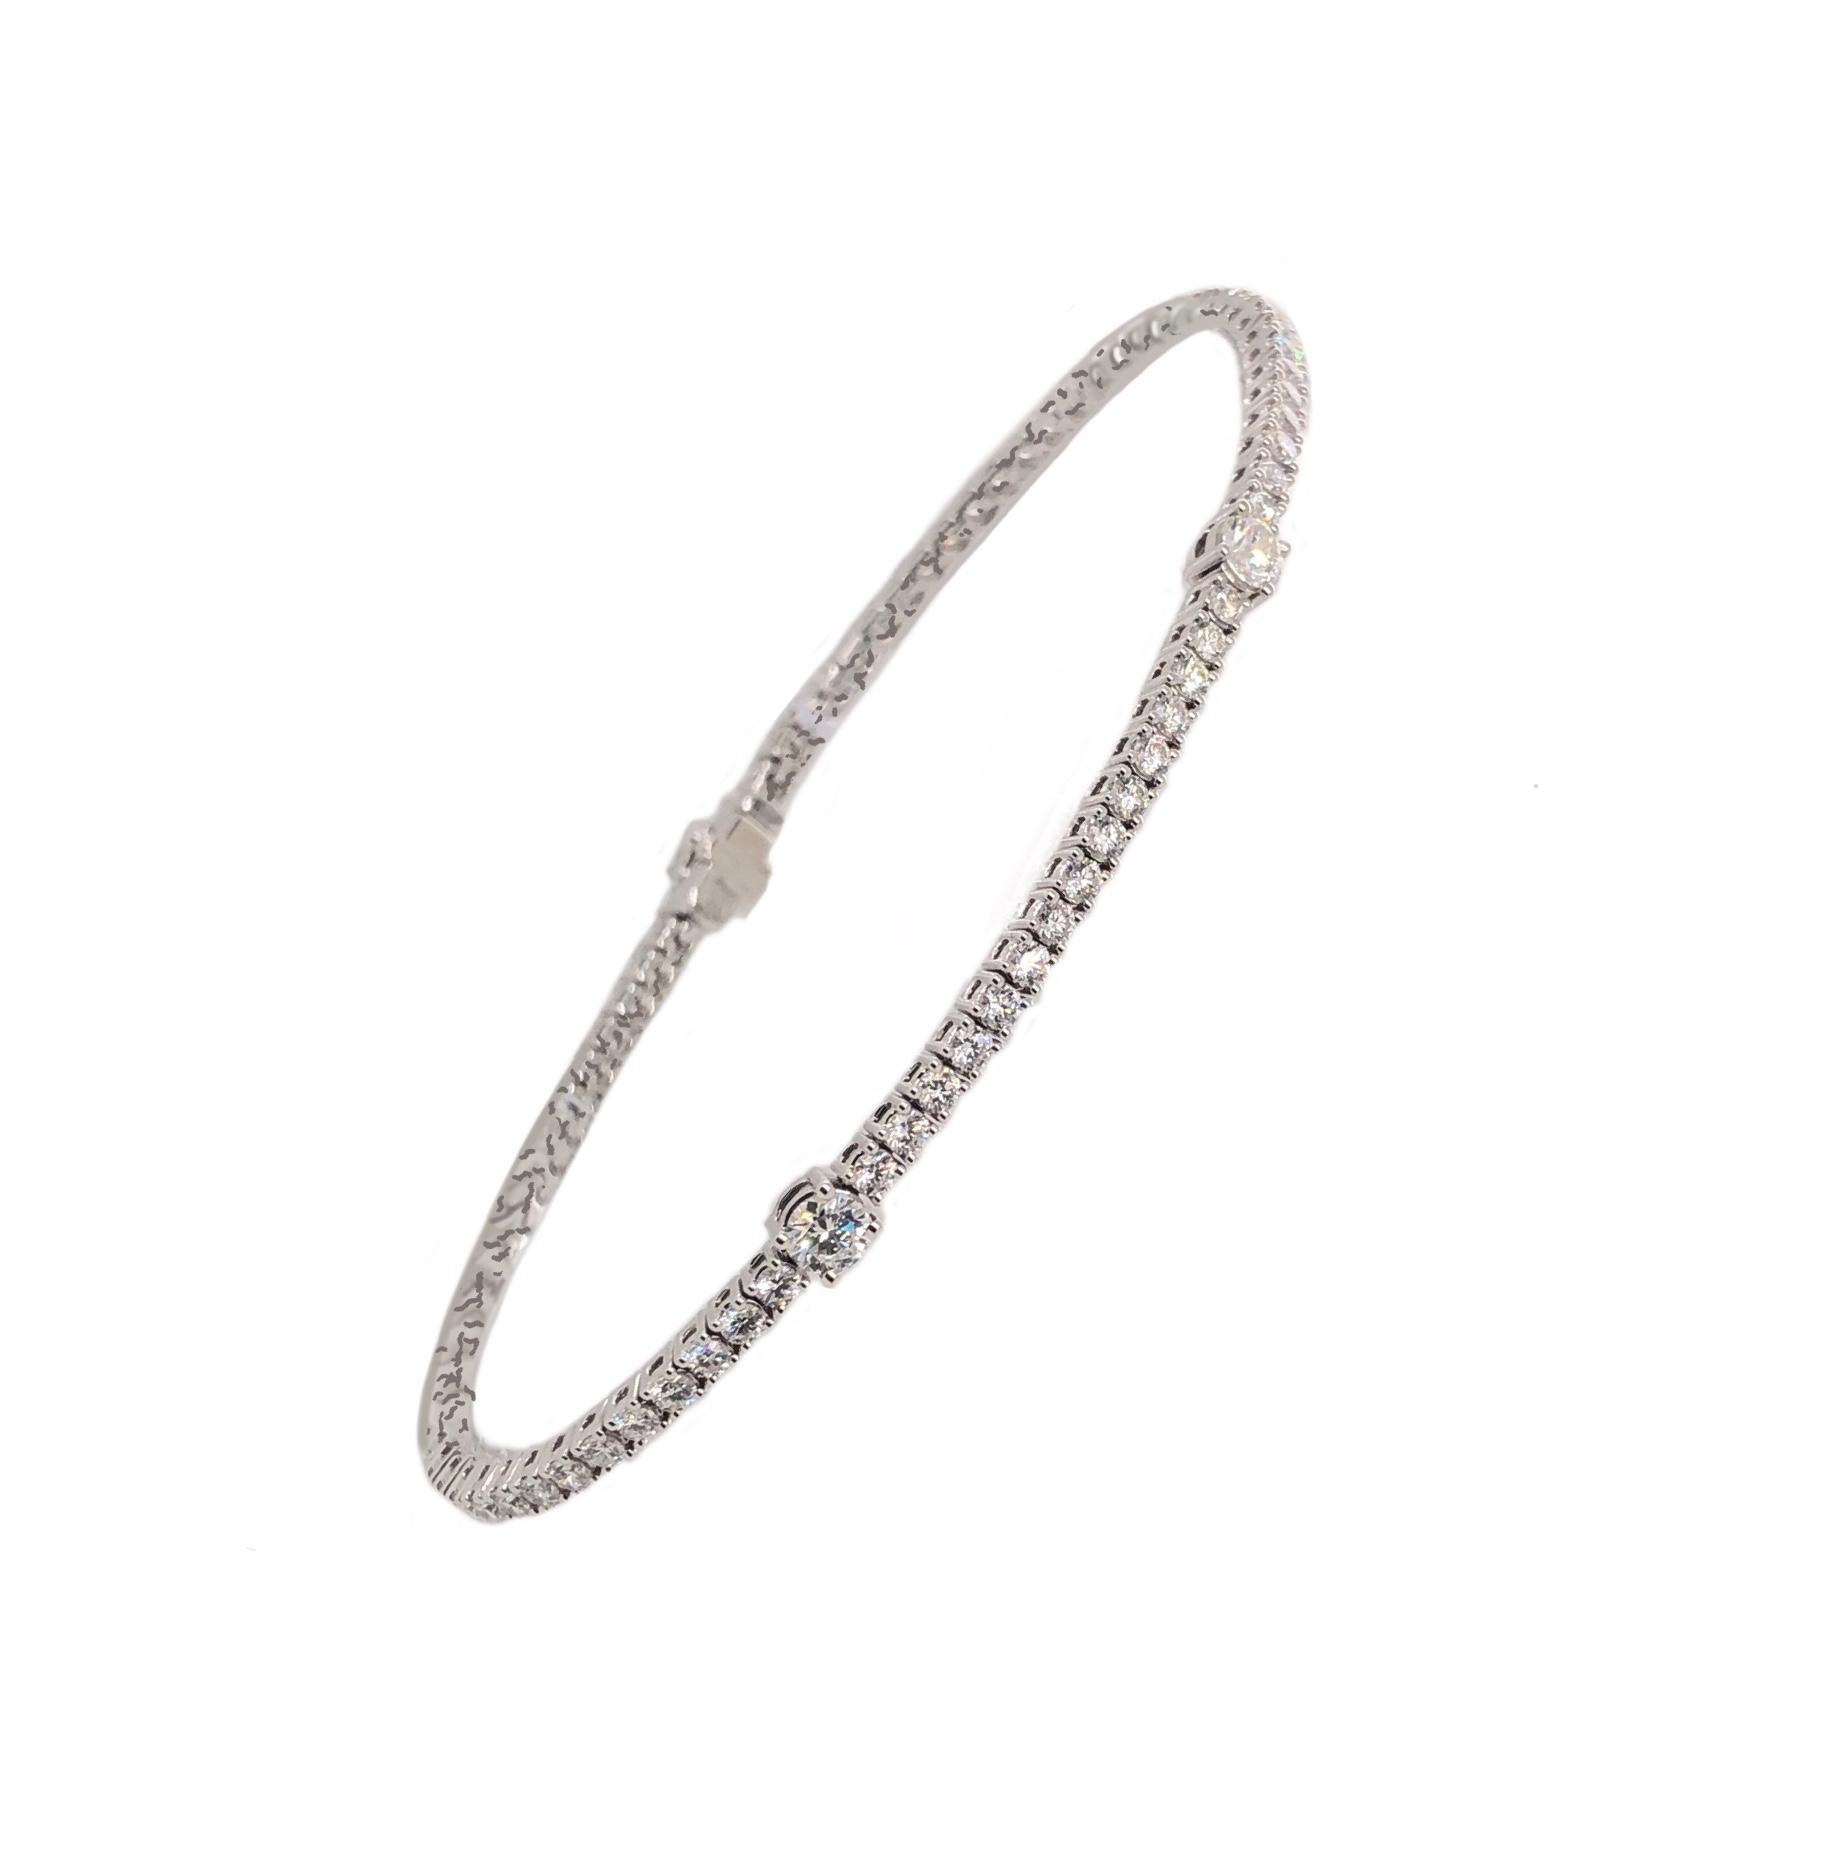 Exquisitely designed, this Memoire Collection Station Tennis Diamond Bracelet is constructed from 18K White Gold and measures 7